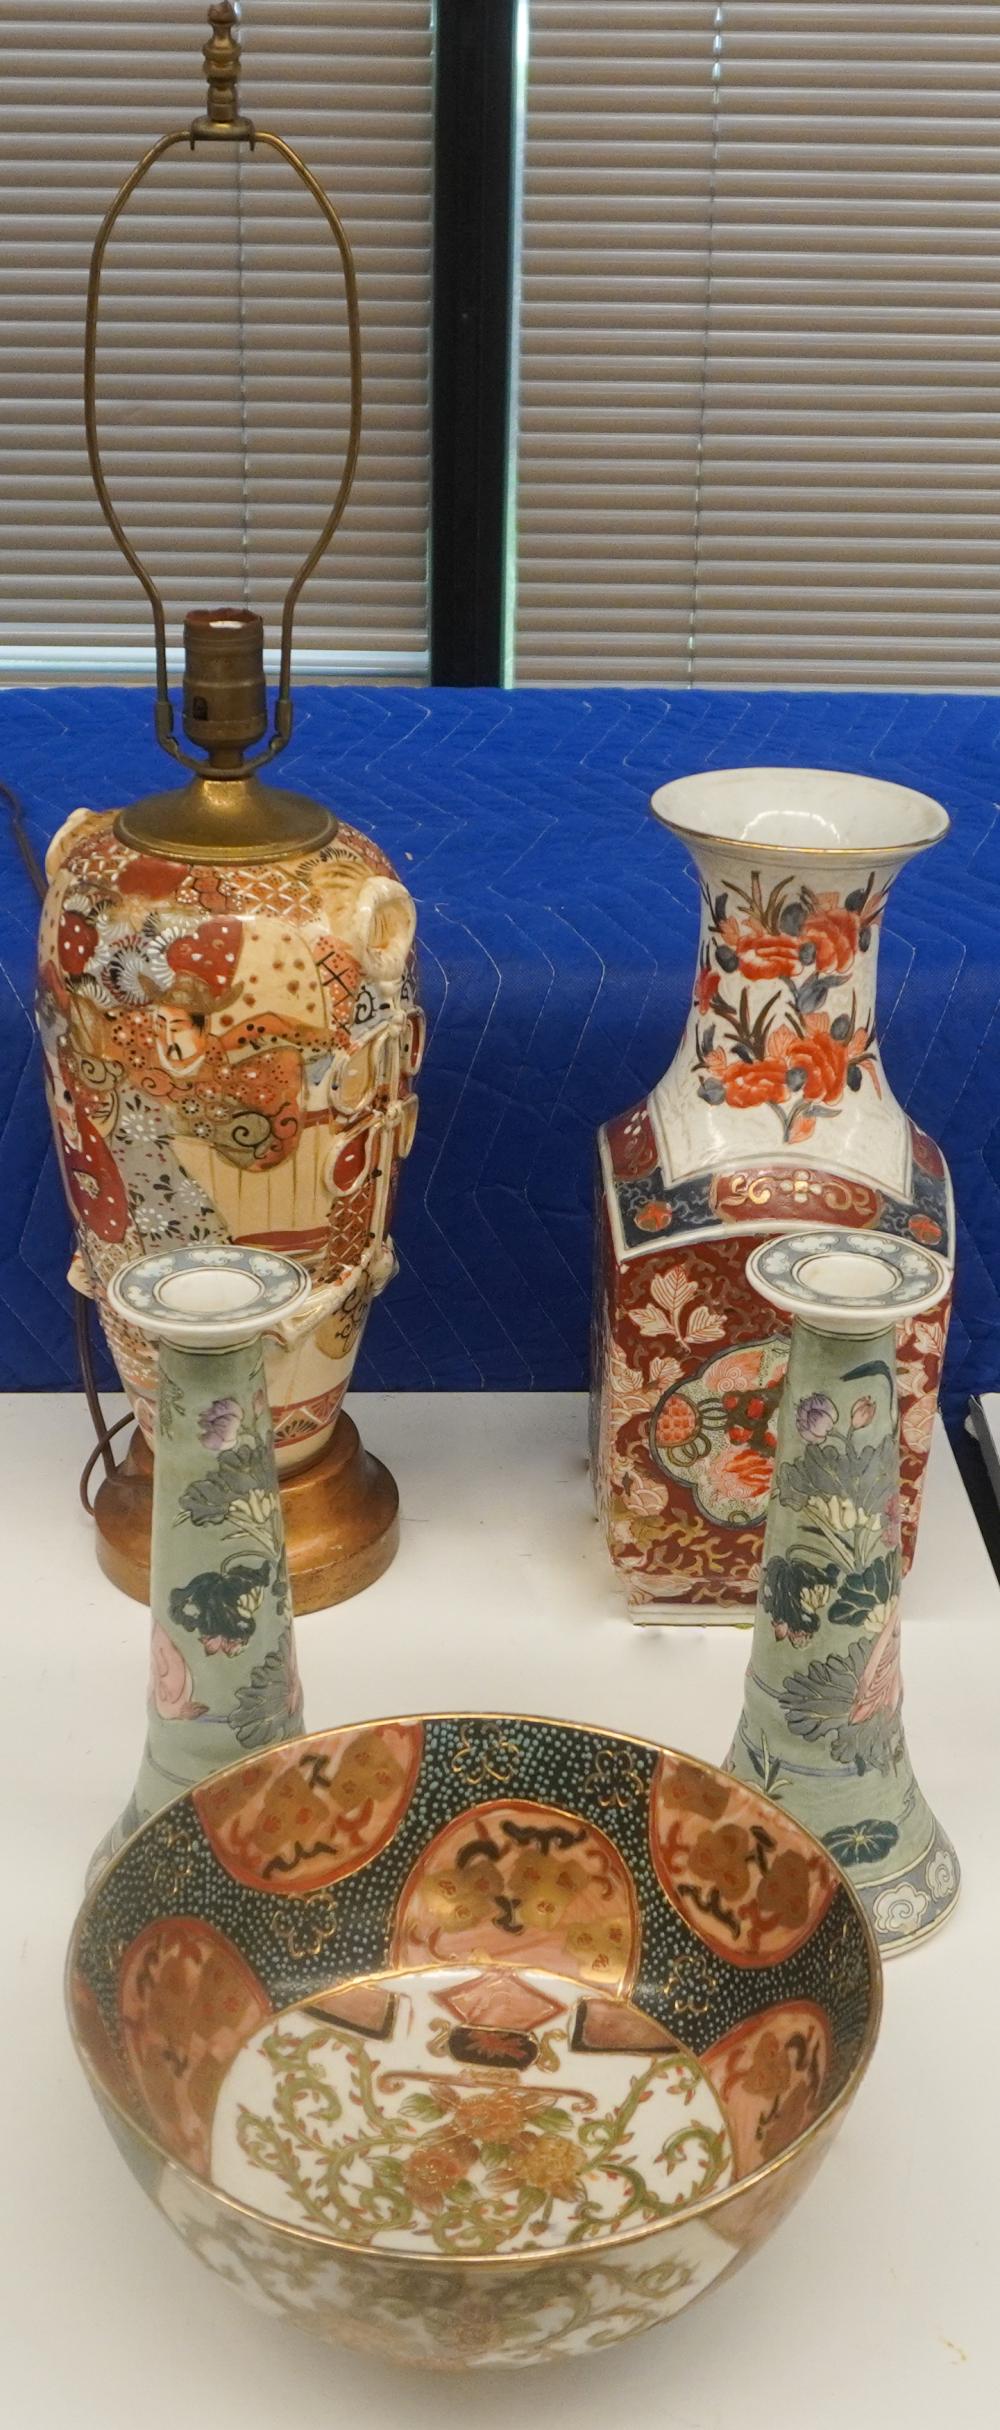 GROUP OF CHINESE AND JAPANESE PORCELAIN 2e7ebe